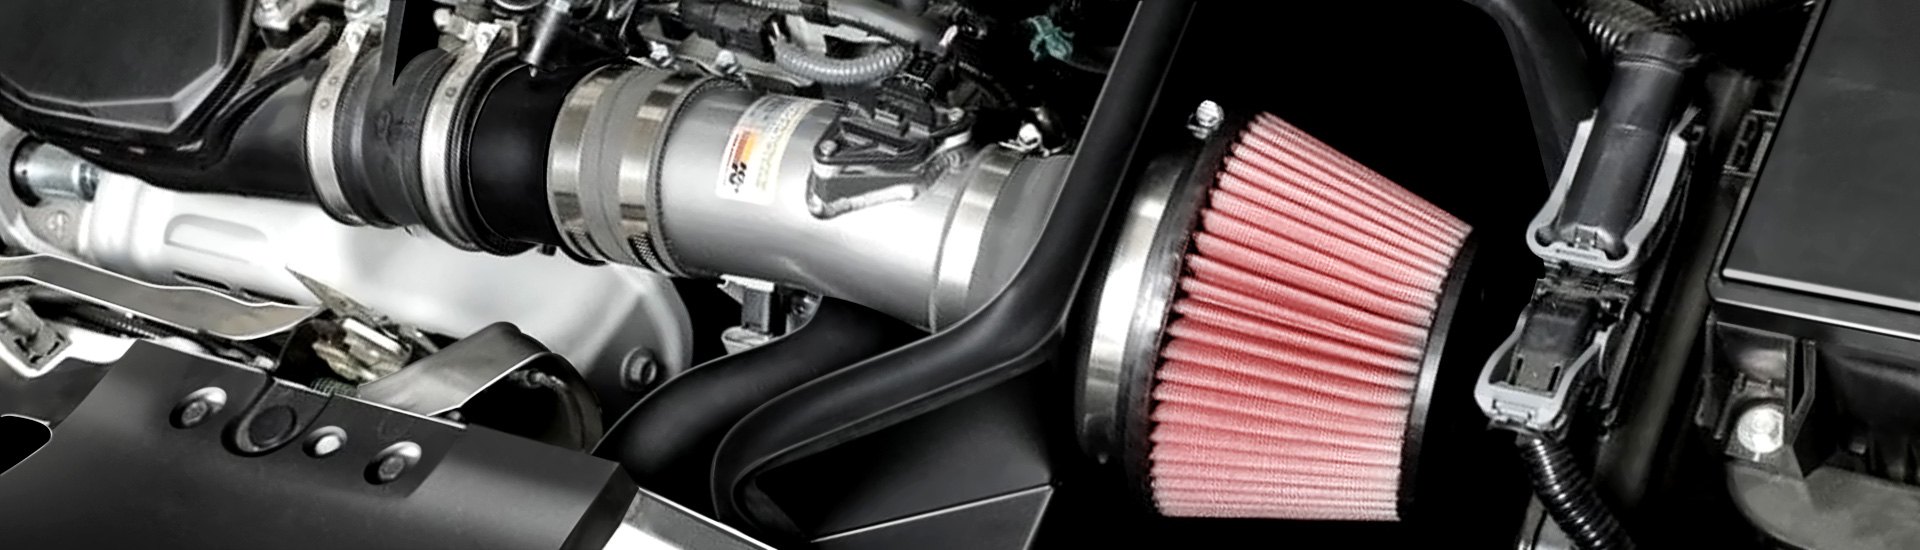 Get More Power Out Of Your 18-19 Accord 1.5L With New K&N Air Intake